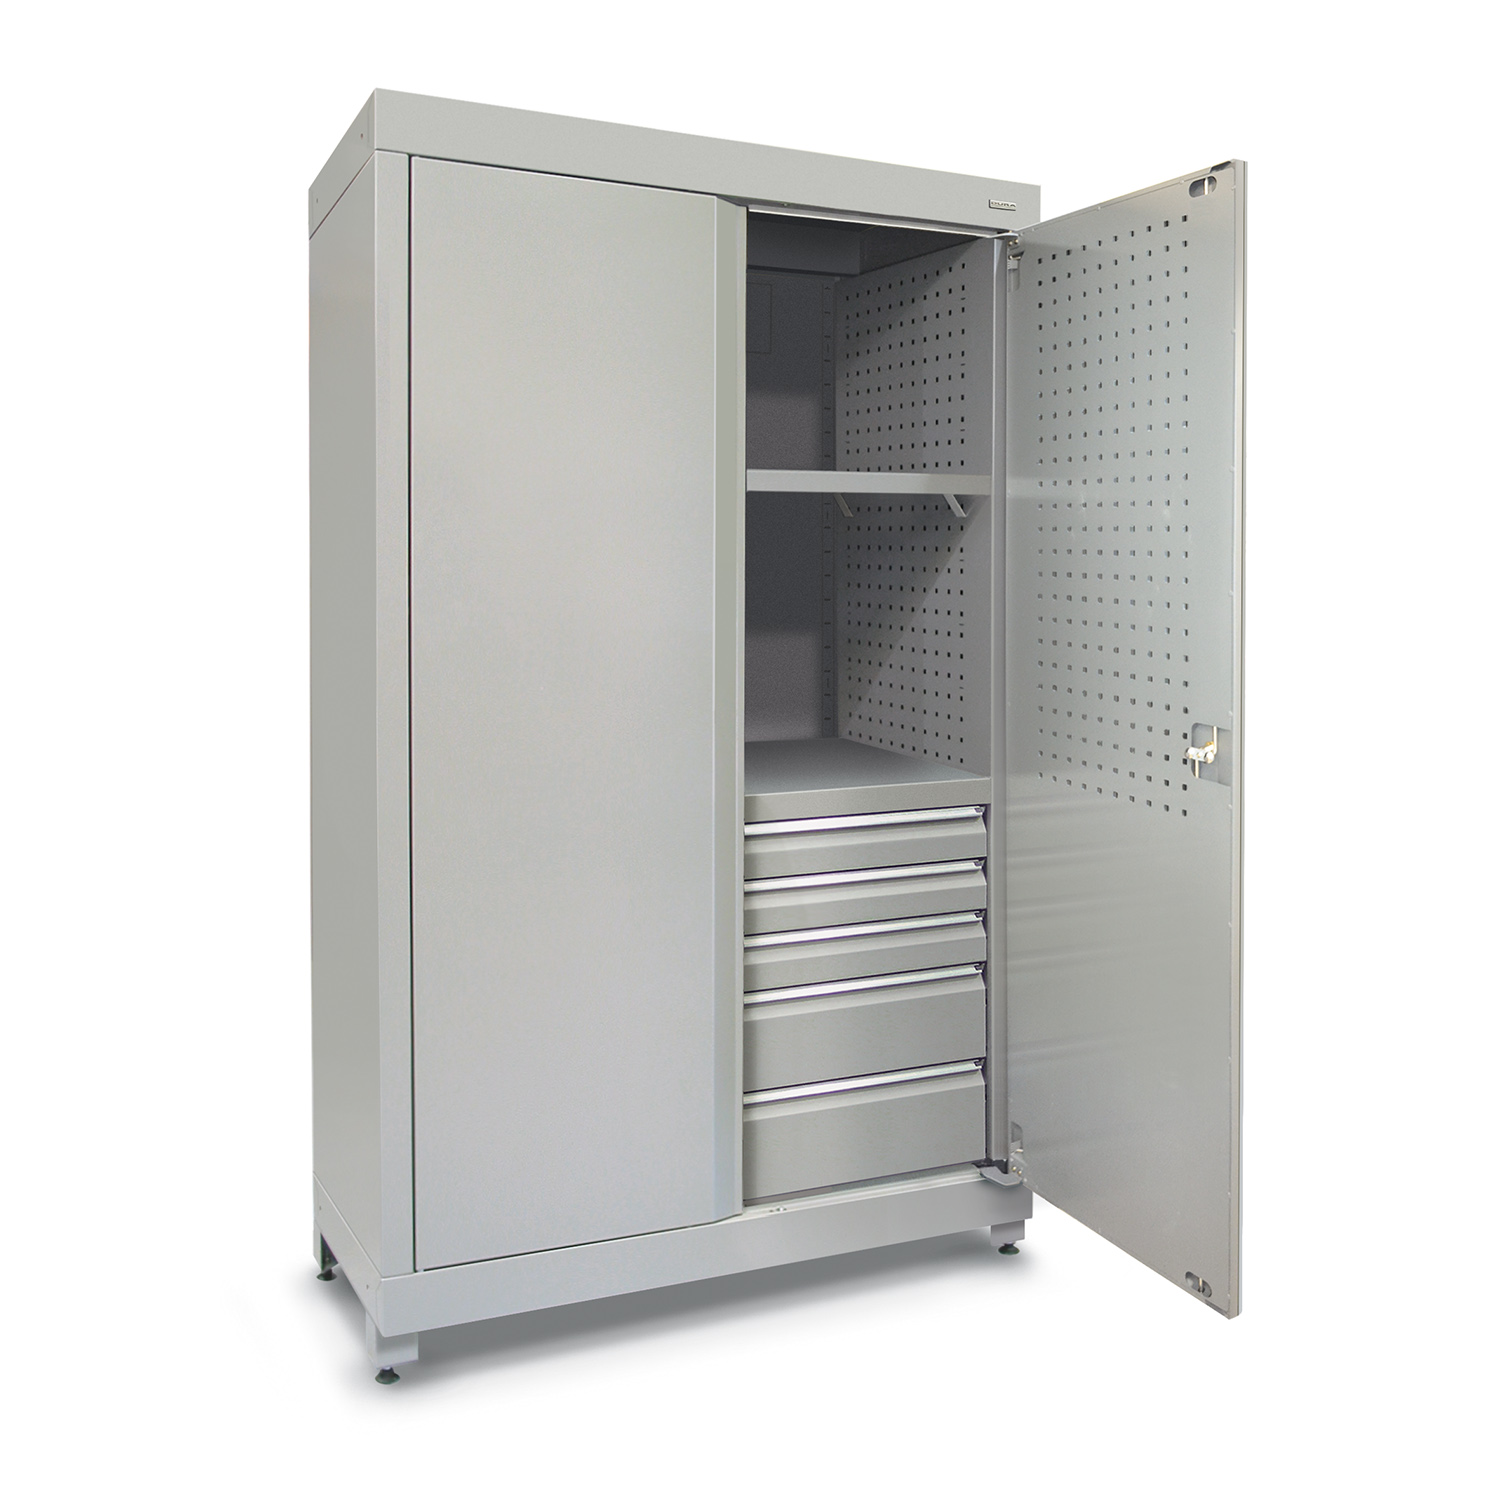 1200mm Heavy-duty shelving unit with 5 drawers